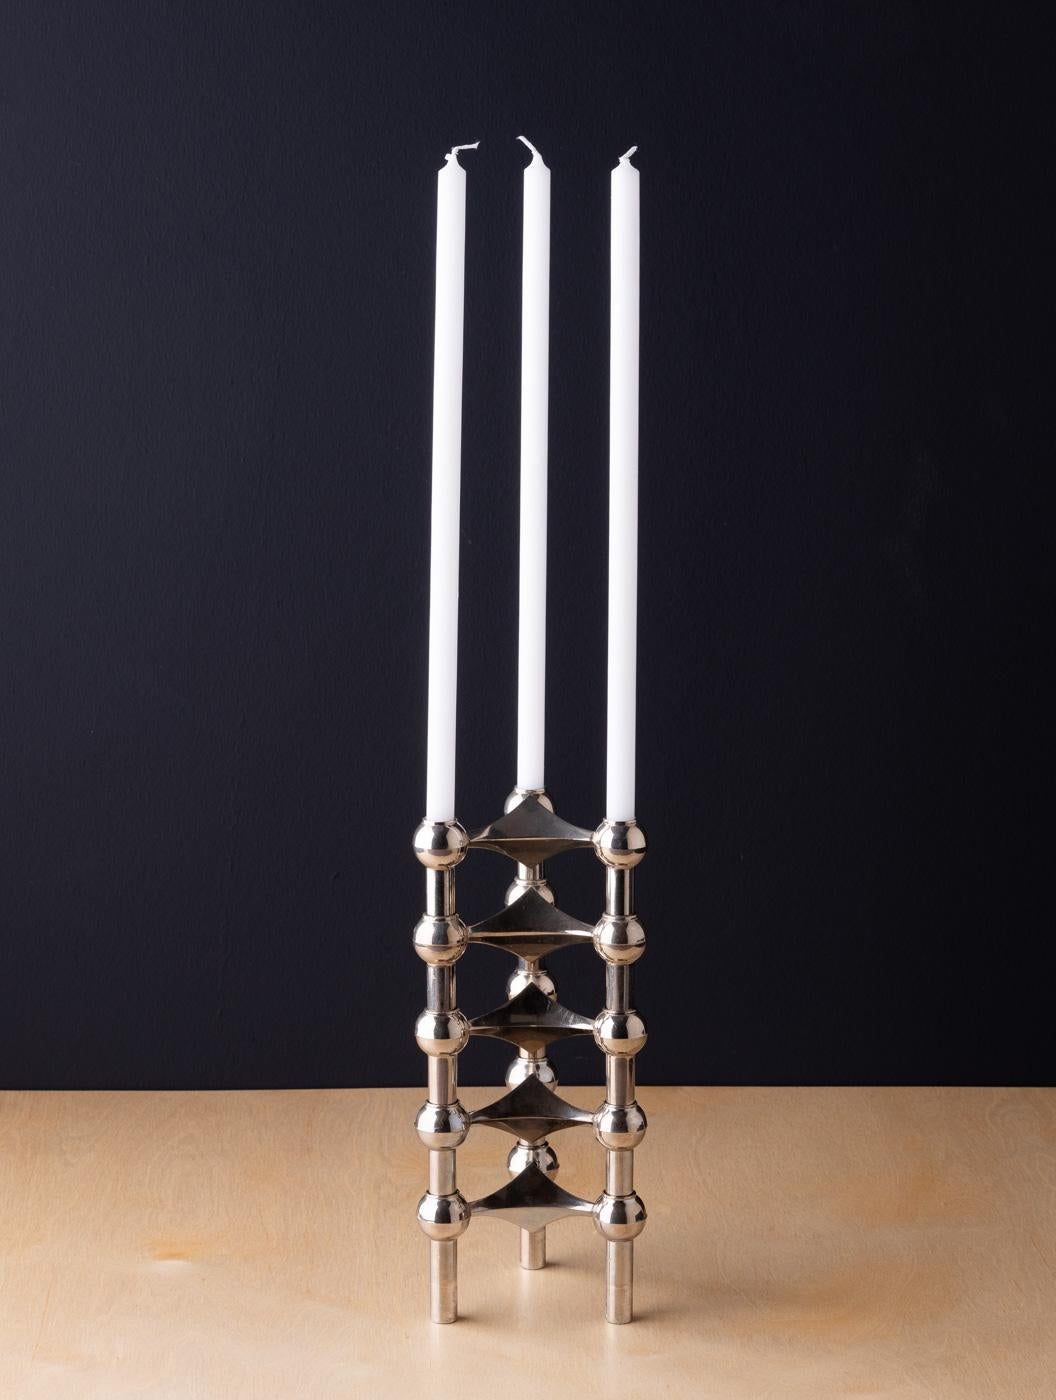 Chrome candle holders by Stoff Nagel